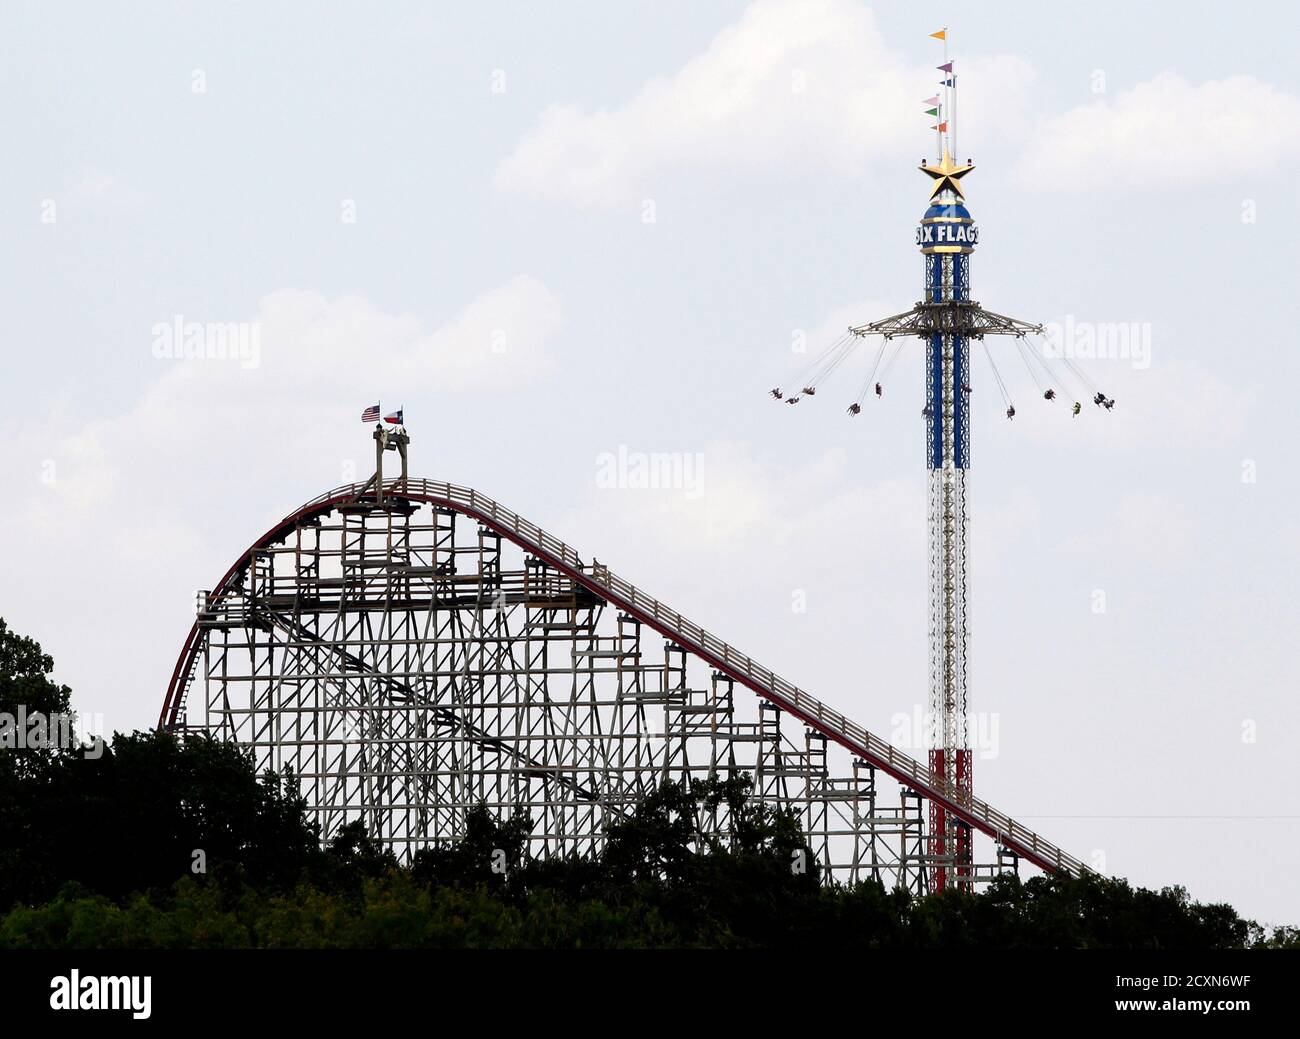 The Texas Giant roller coaster ride (L) is seen at the Six Flags Over Texas amusement park in Arlington, Texas July 23, 2013.  A woman who plunged from the Texas Giant roller coaster ride at the Six Flags Over Texas amusement park died of multiple traumatic injuries in a fall that was ruled an accident, authorities said on Monday.  REUTERS/Mike Stone (UNITED STATES - Tags: SOCIETY) Stock Photo